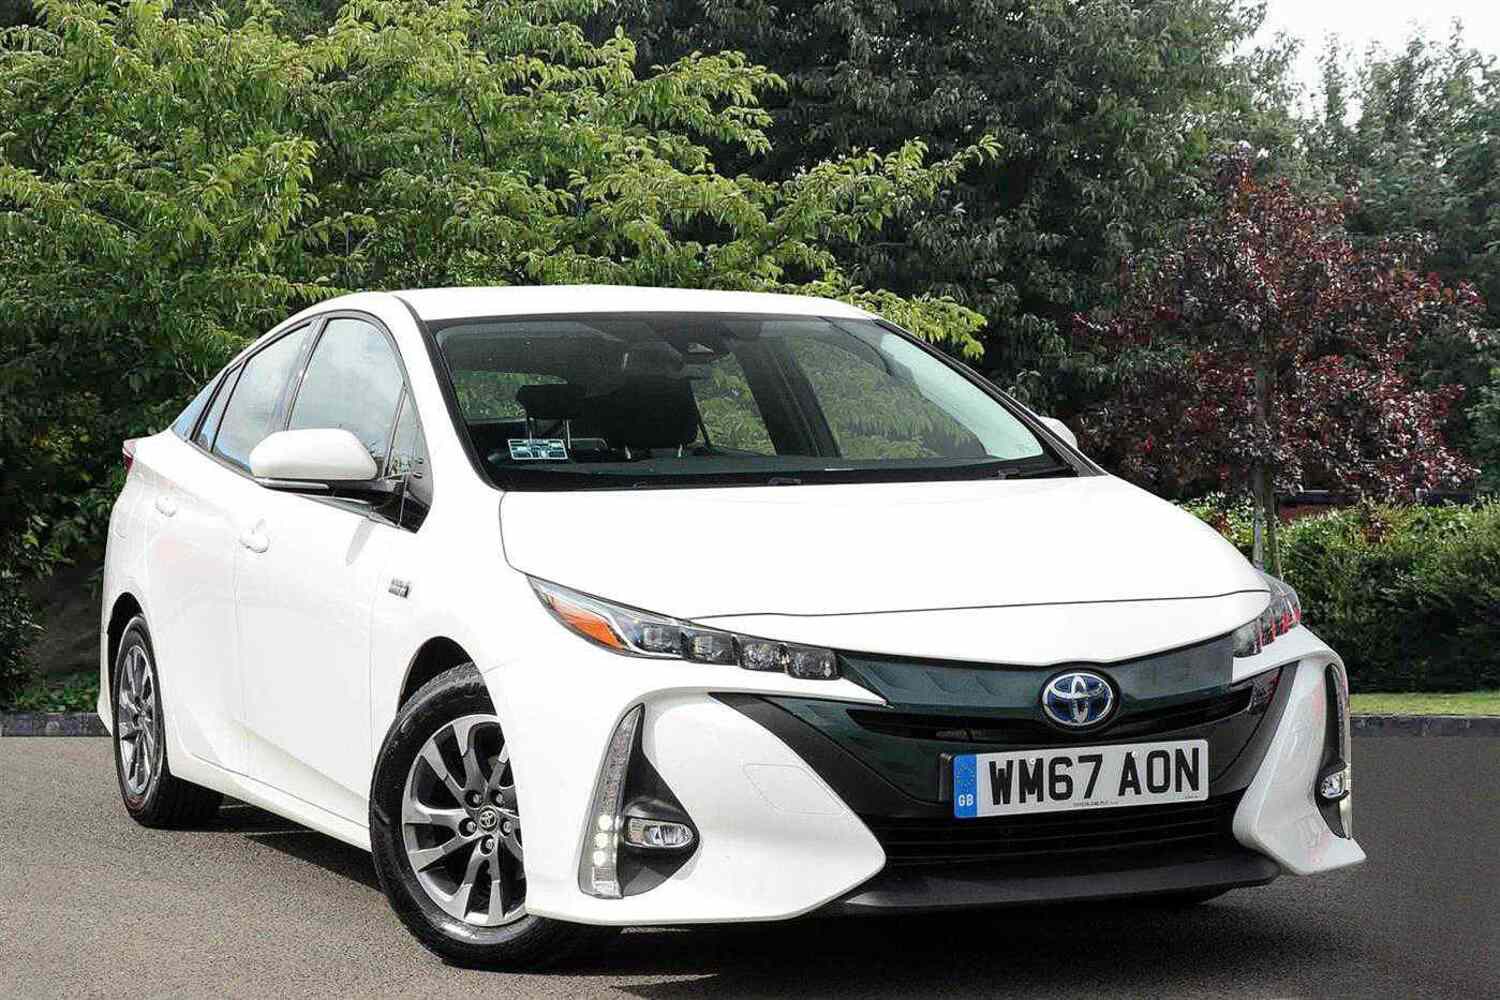 Toyota Prius 2018 for sale